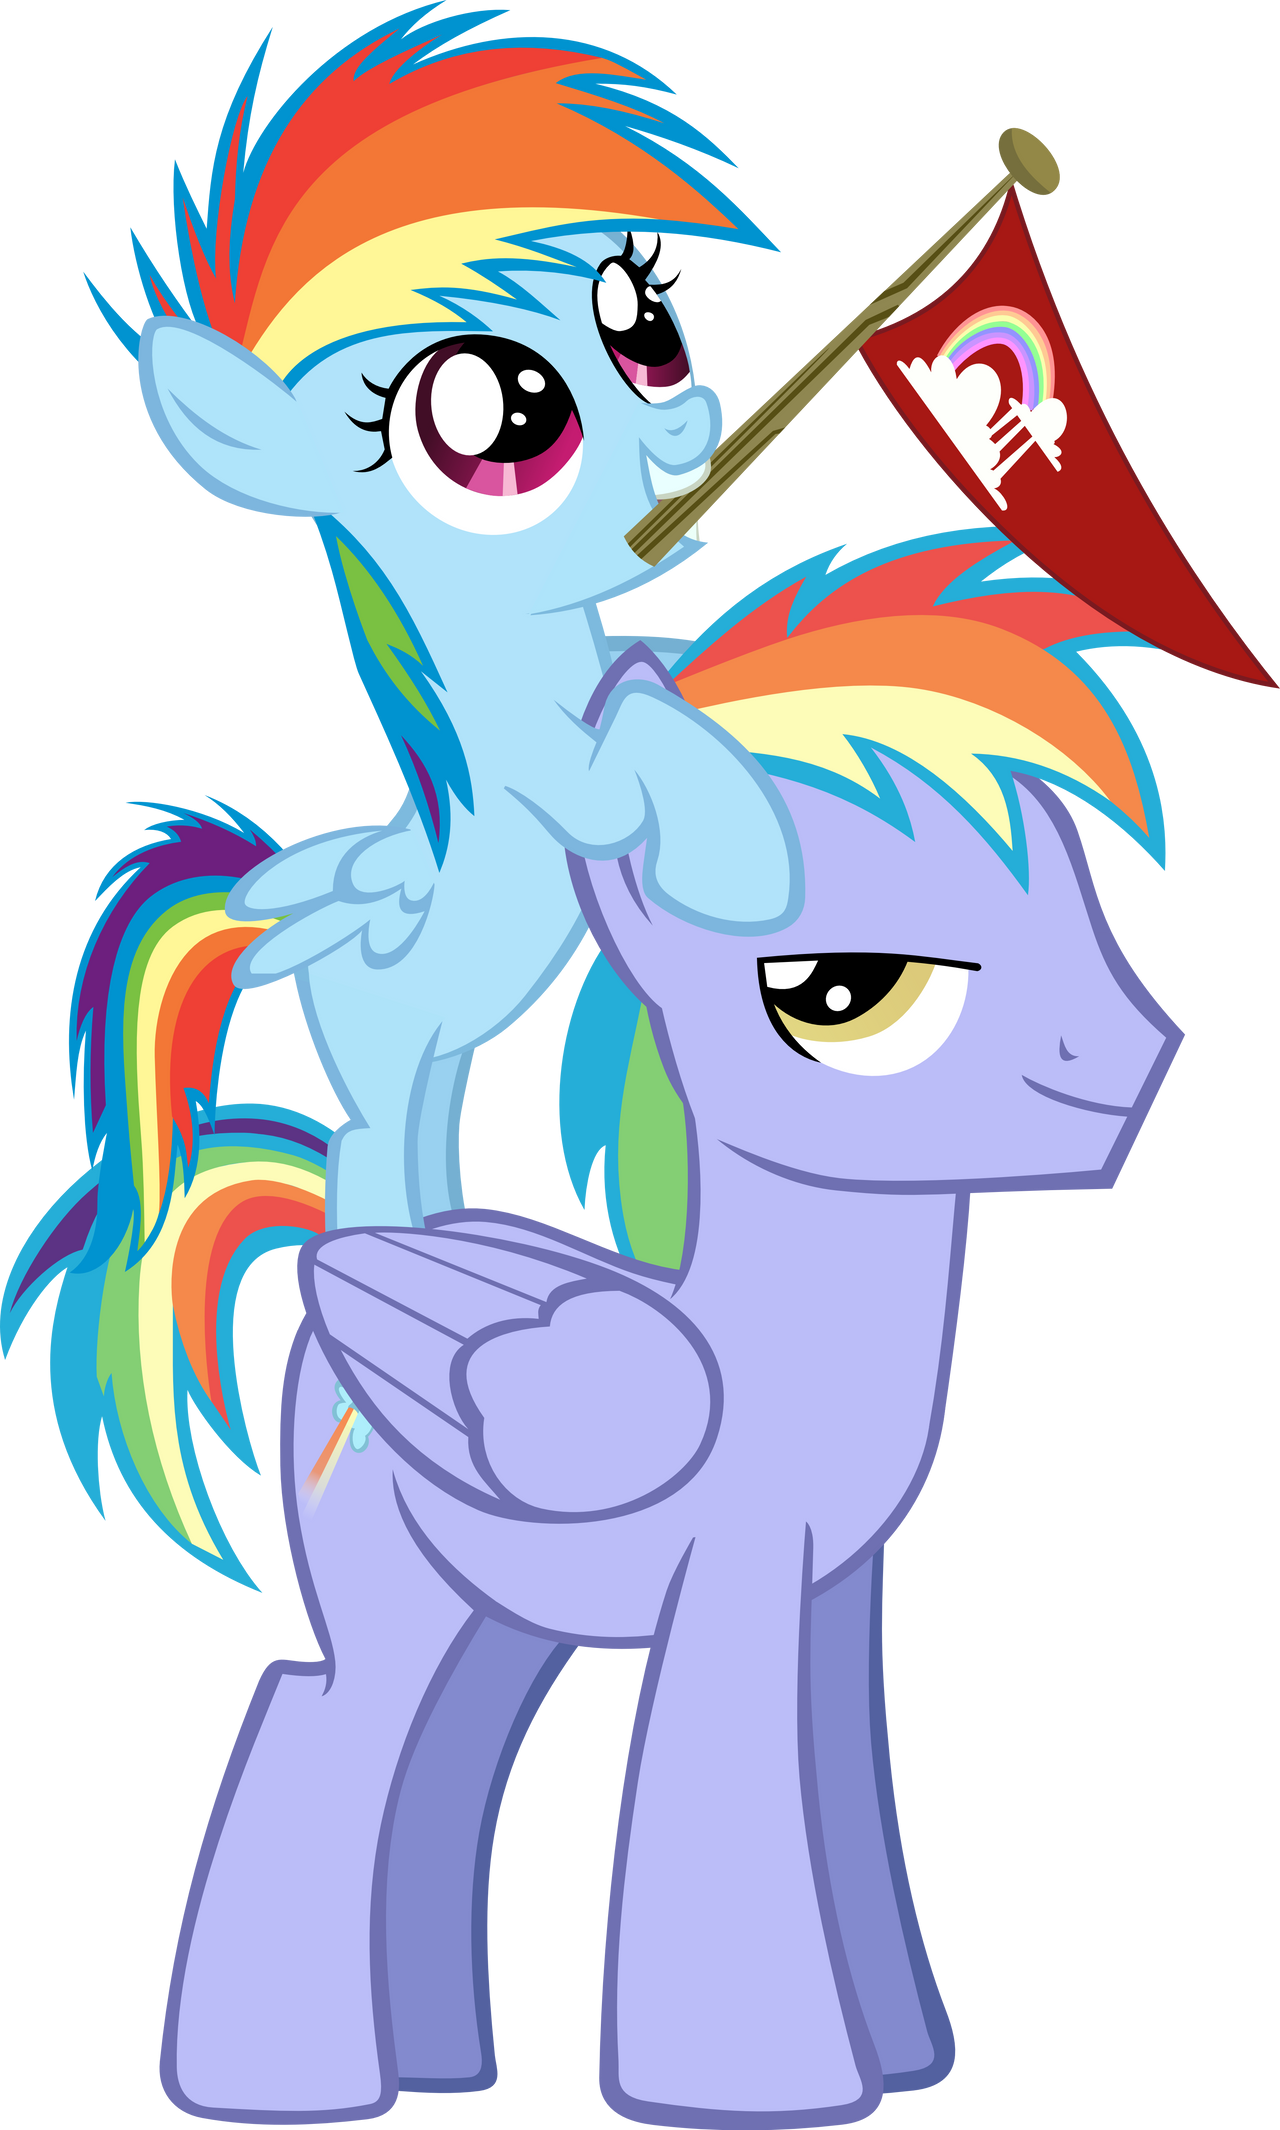 rainbow_dash_and_her_dad_by_jerick-d5uee2r.png